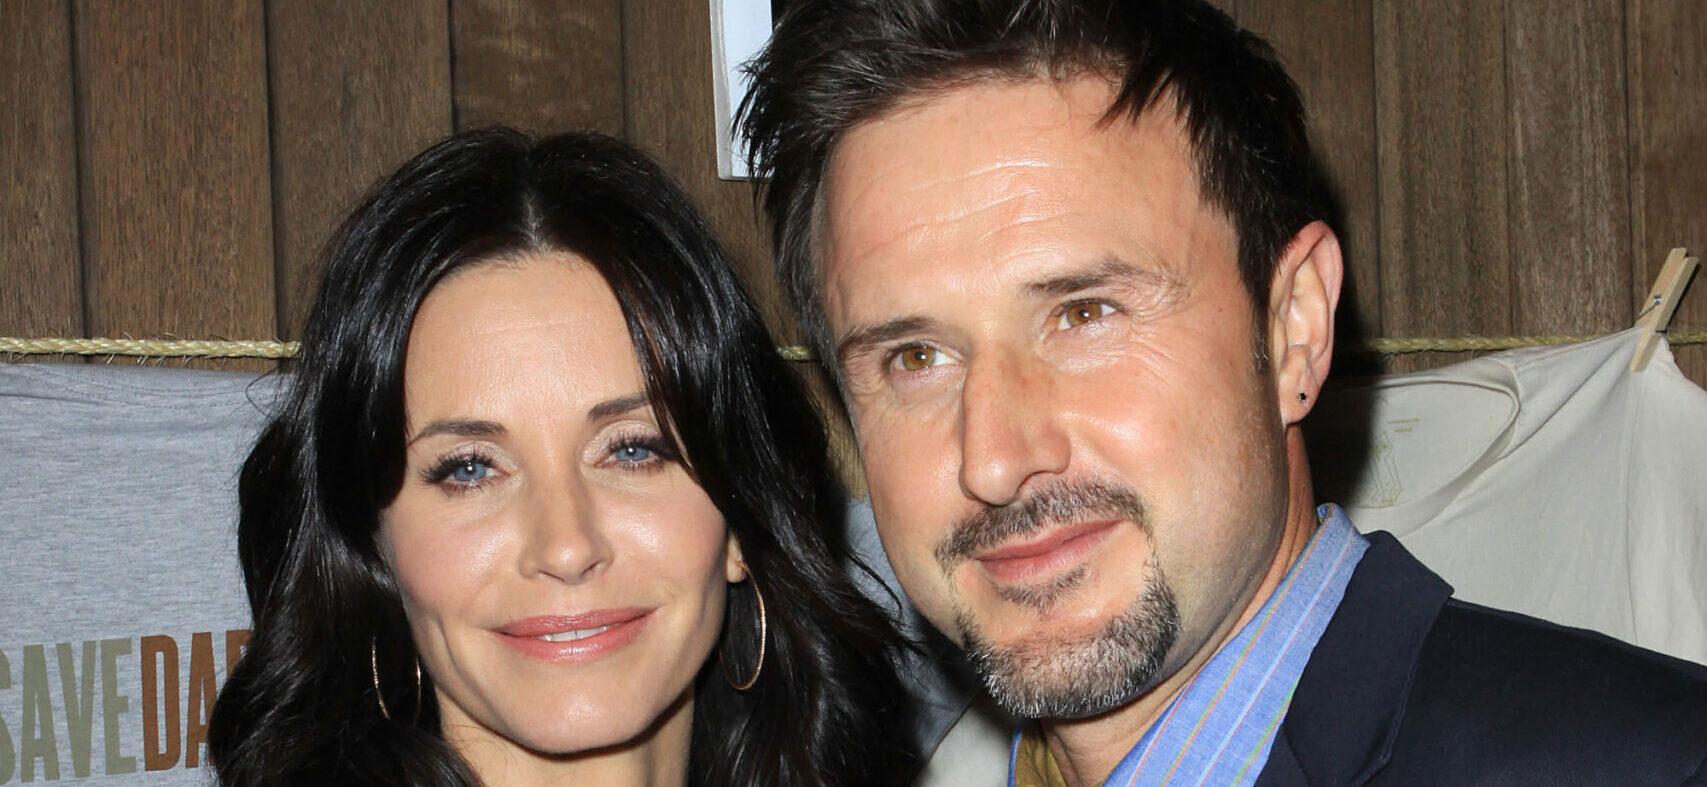 Courteney Cox and David Arquette Official Launch Party for Save Darfur Coalition and Propr held at The Propr Store & Jexy Venice Beach, California - 17.12.09